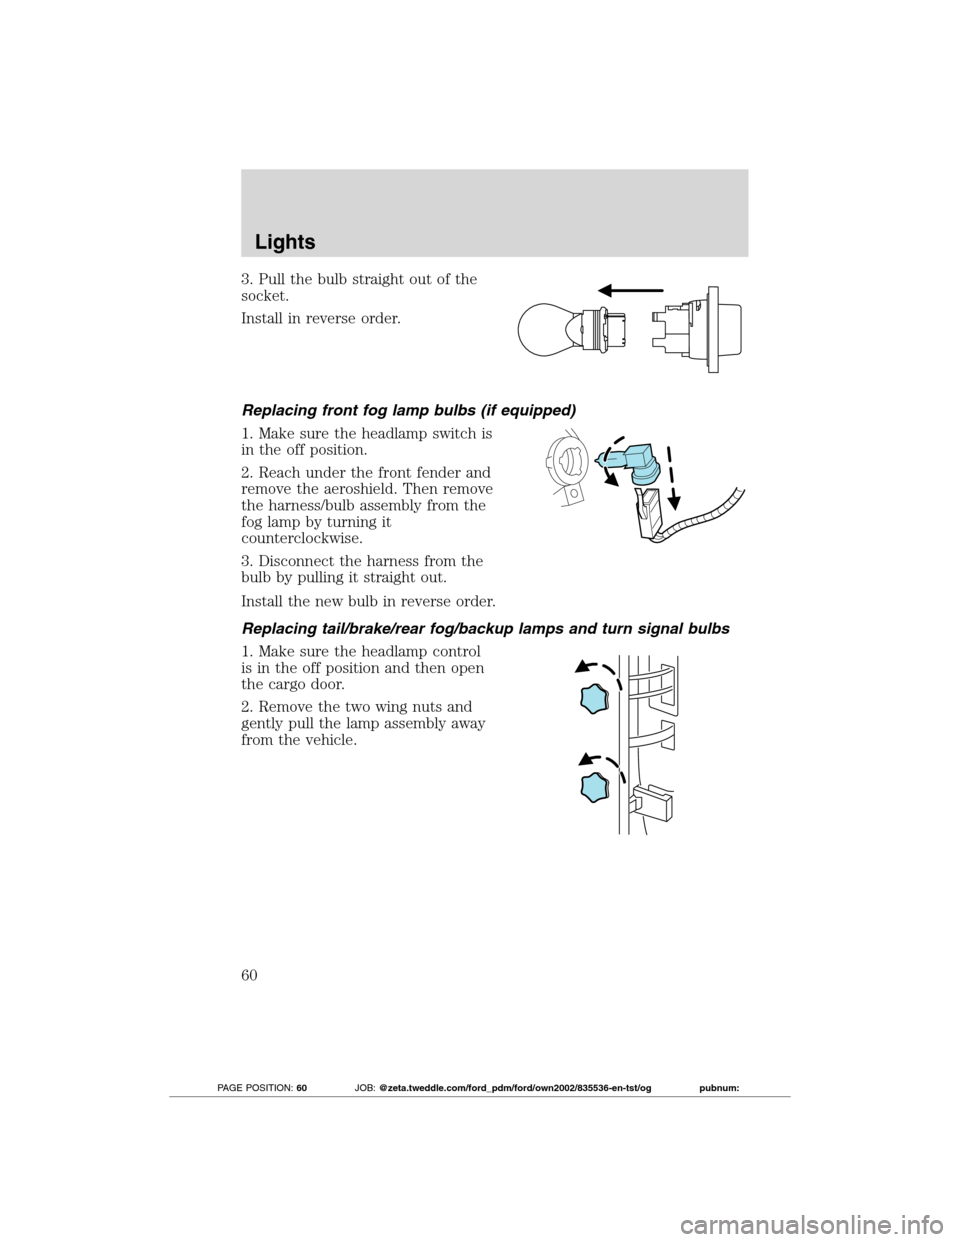 FORD TRANSIT CONNECT 2012 1.G User Guide 3. Pull the bulb straight out of the
socket.
Install in reverse order.
Replacing front fog lamp bulbs (if equipped)
1. Make sure the headlamp switch is
in the off position.
2. Reach under the front fe